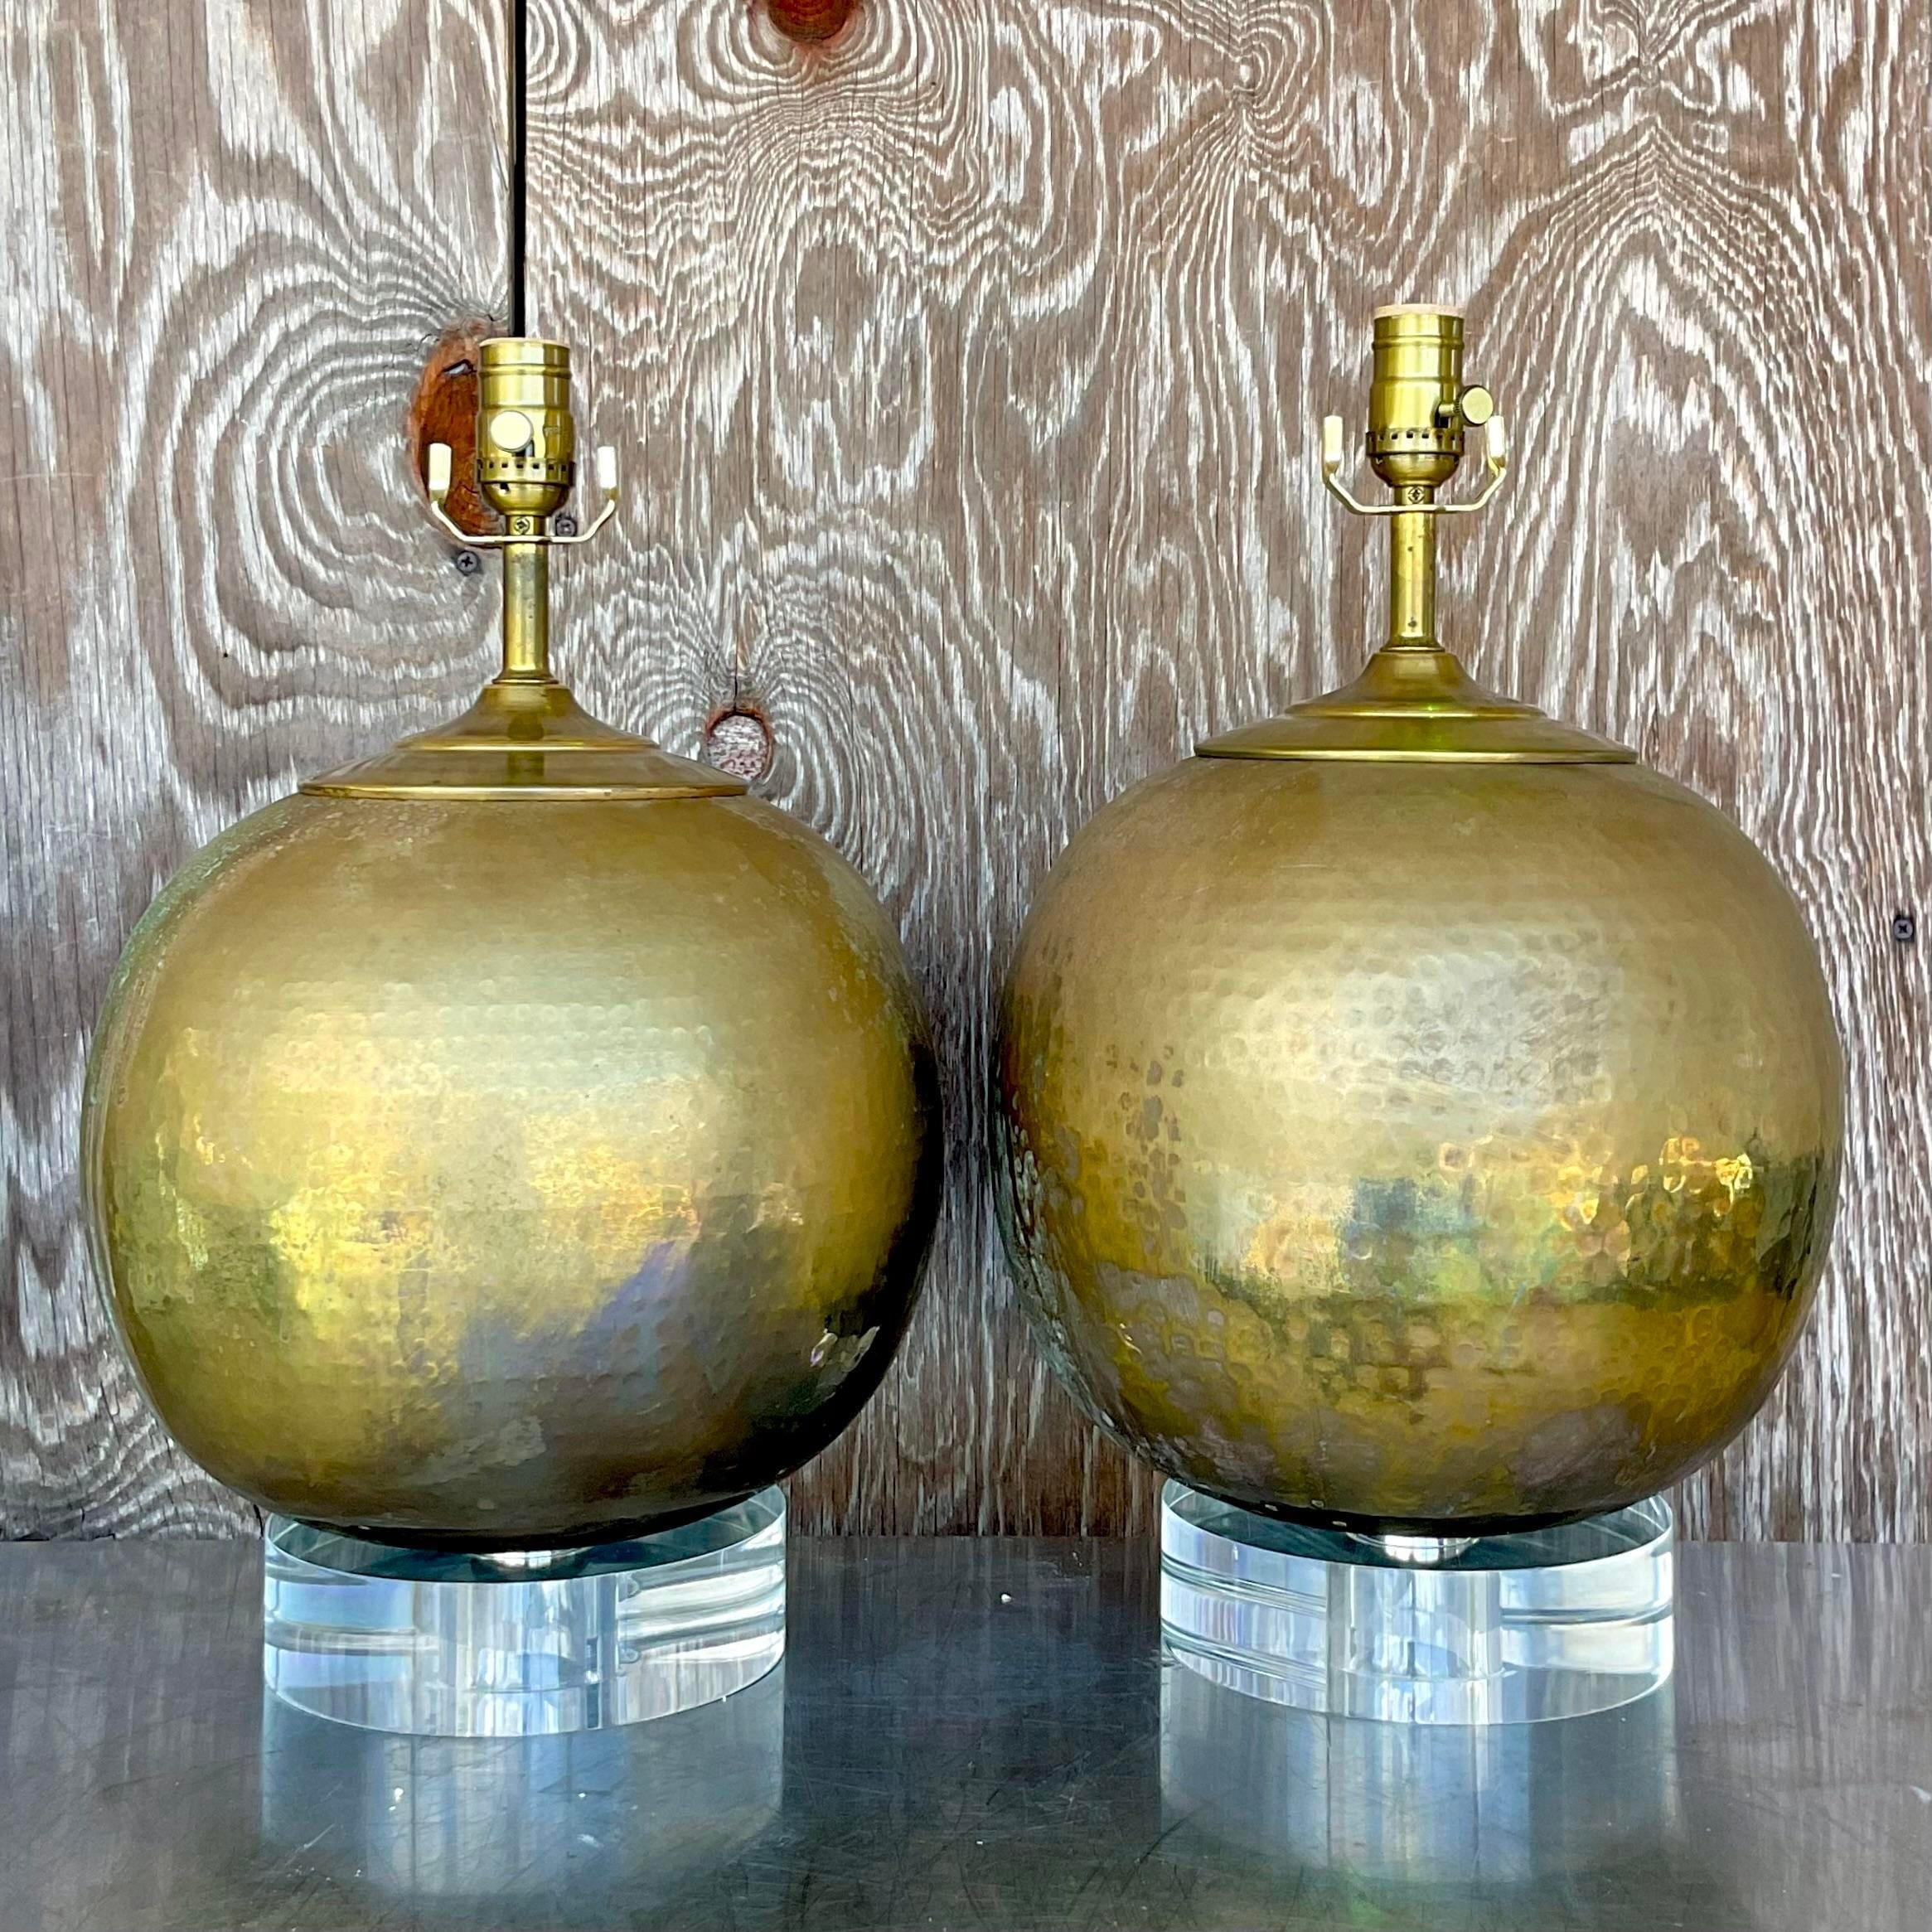 A fabulous pair of vintage hammered brass lamps. A chic sphere shape resting on a heavy lucite plinth. Fully restored with all new wiring, hardware and plinths. Acquired from a Palm Beach estate